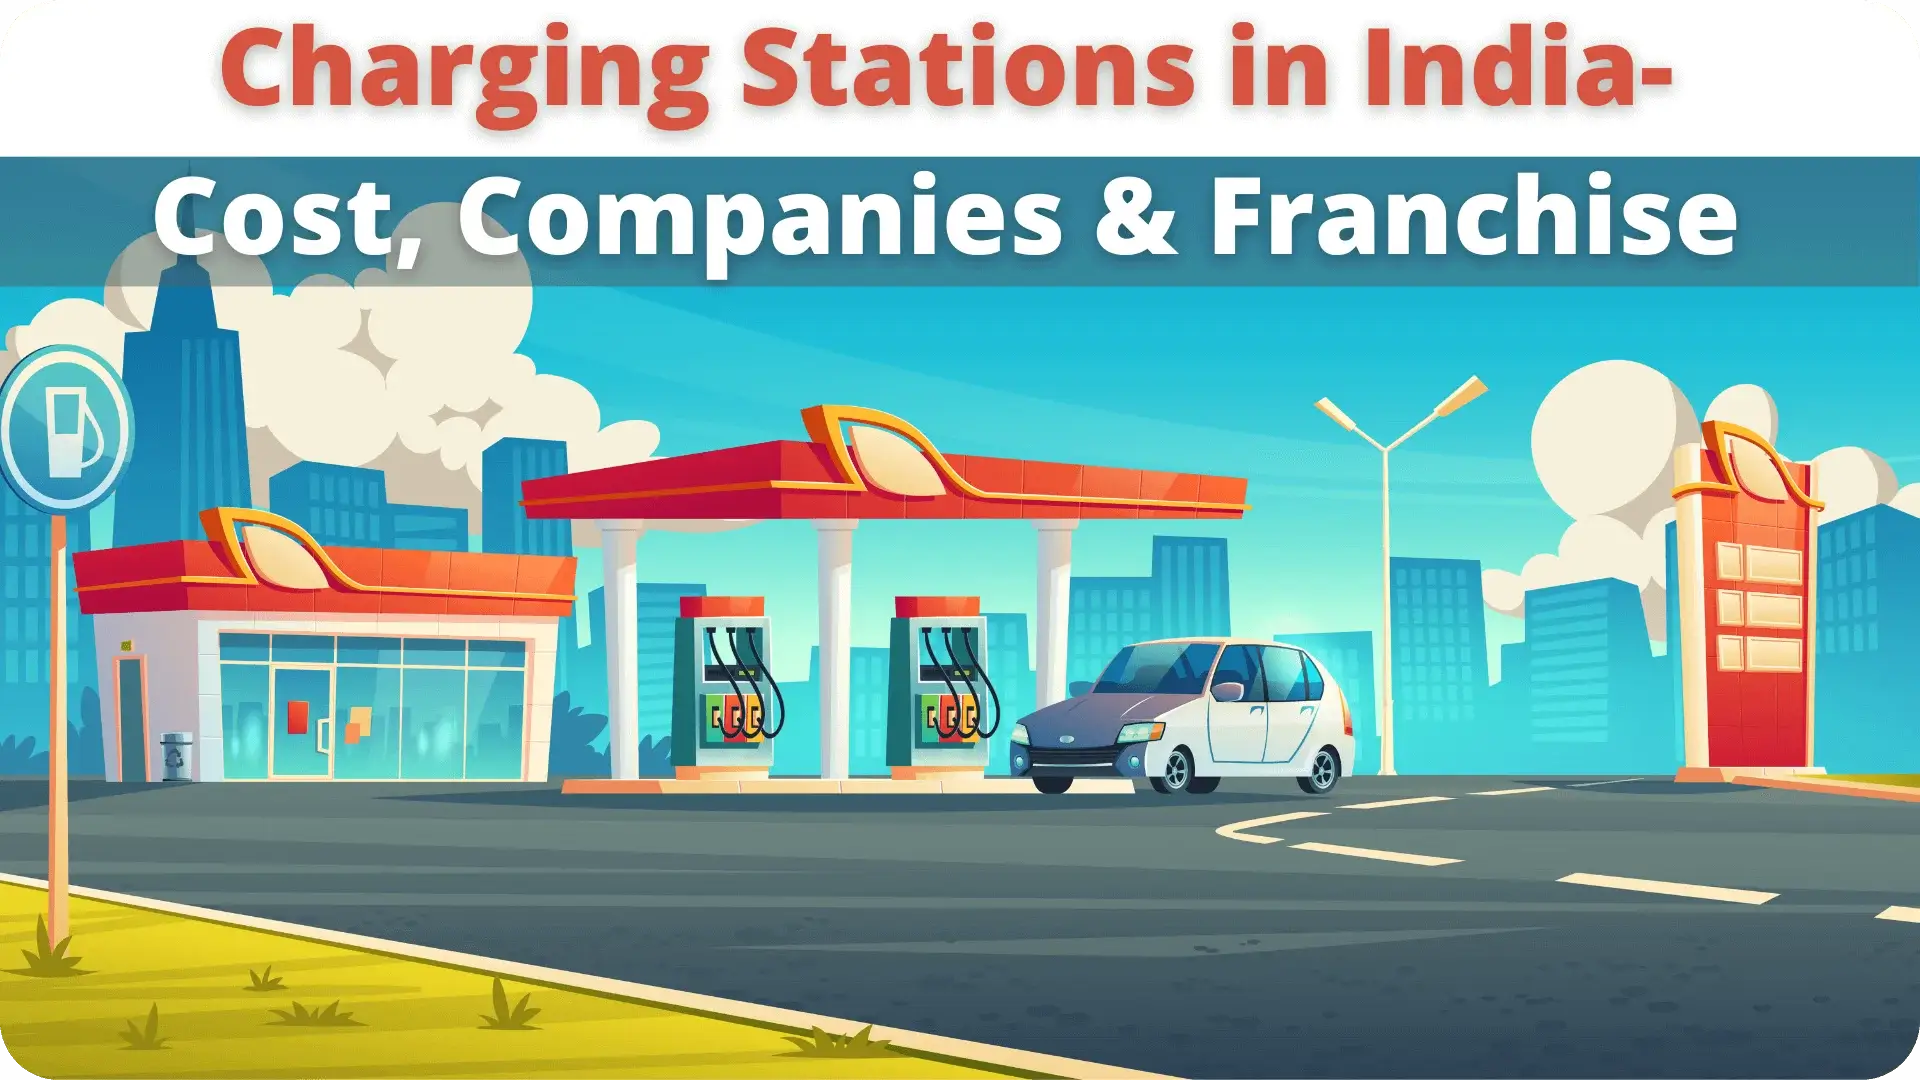 https://e-vehicleinfo.com/charging-stations-in-india-cost-companies-franchise/